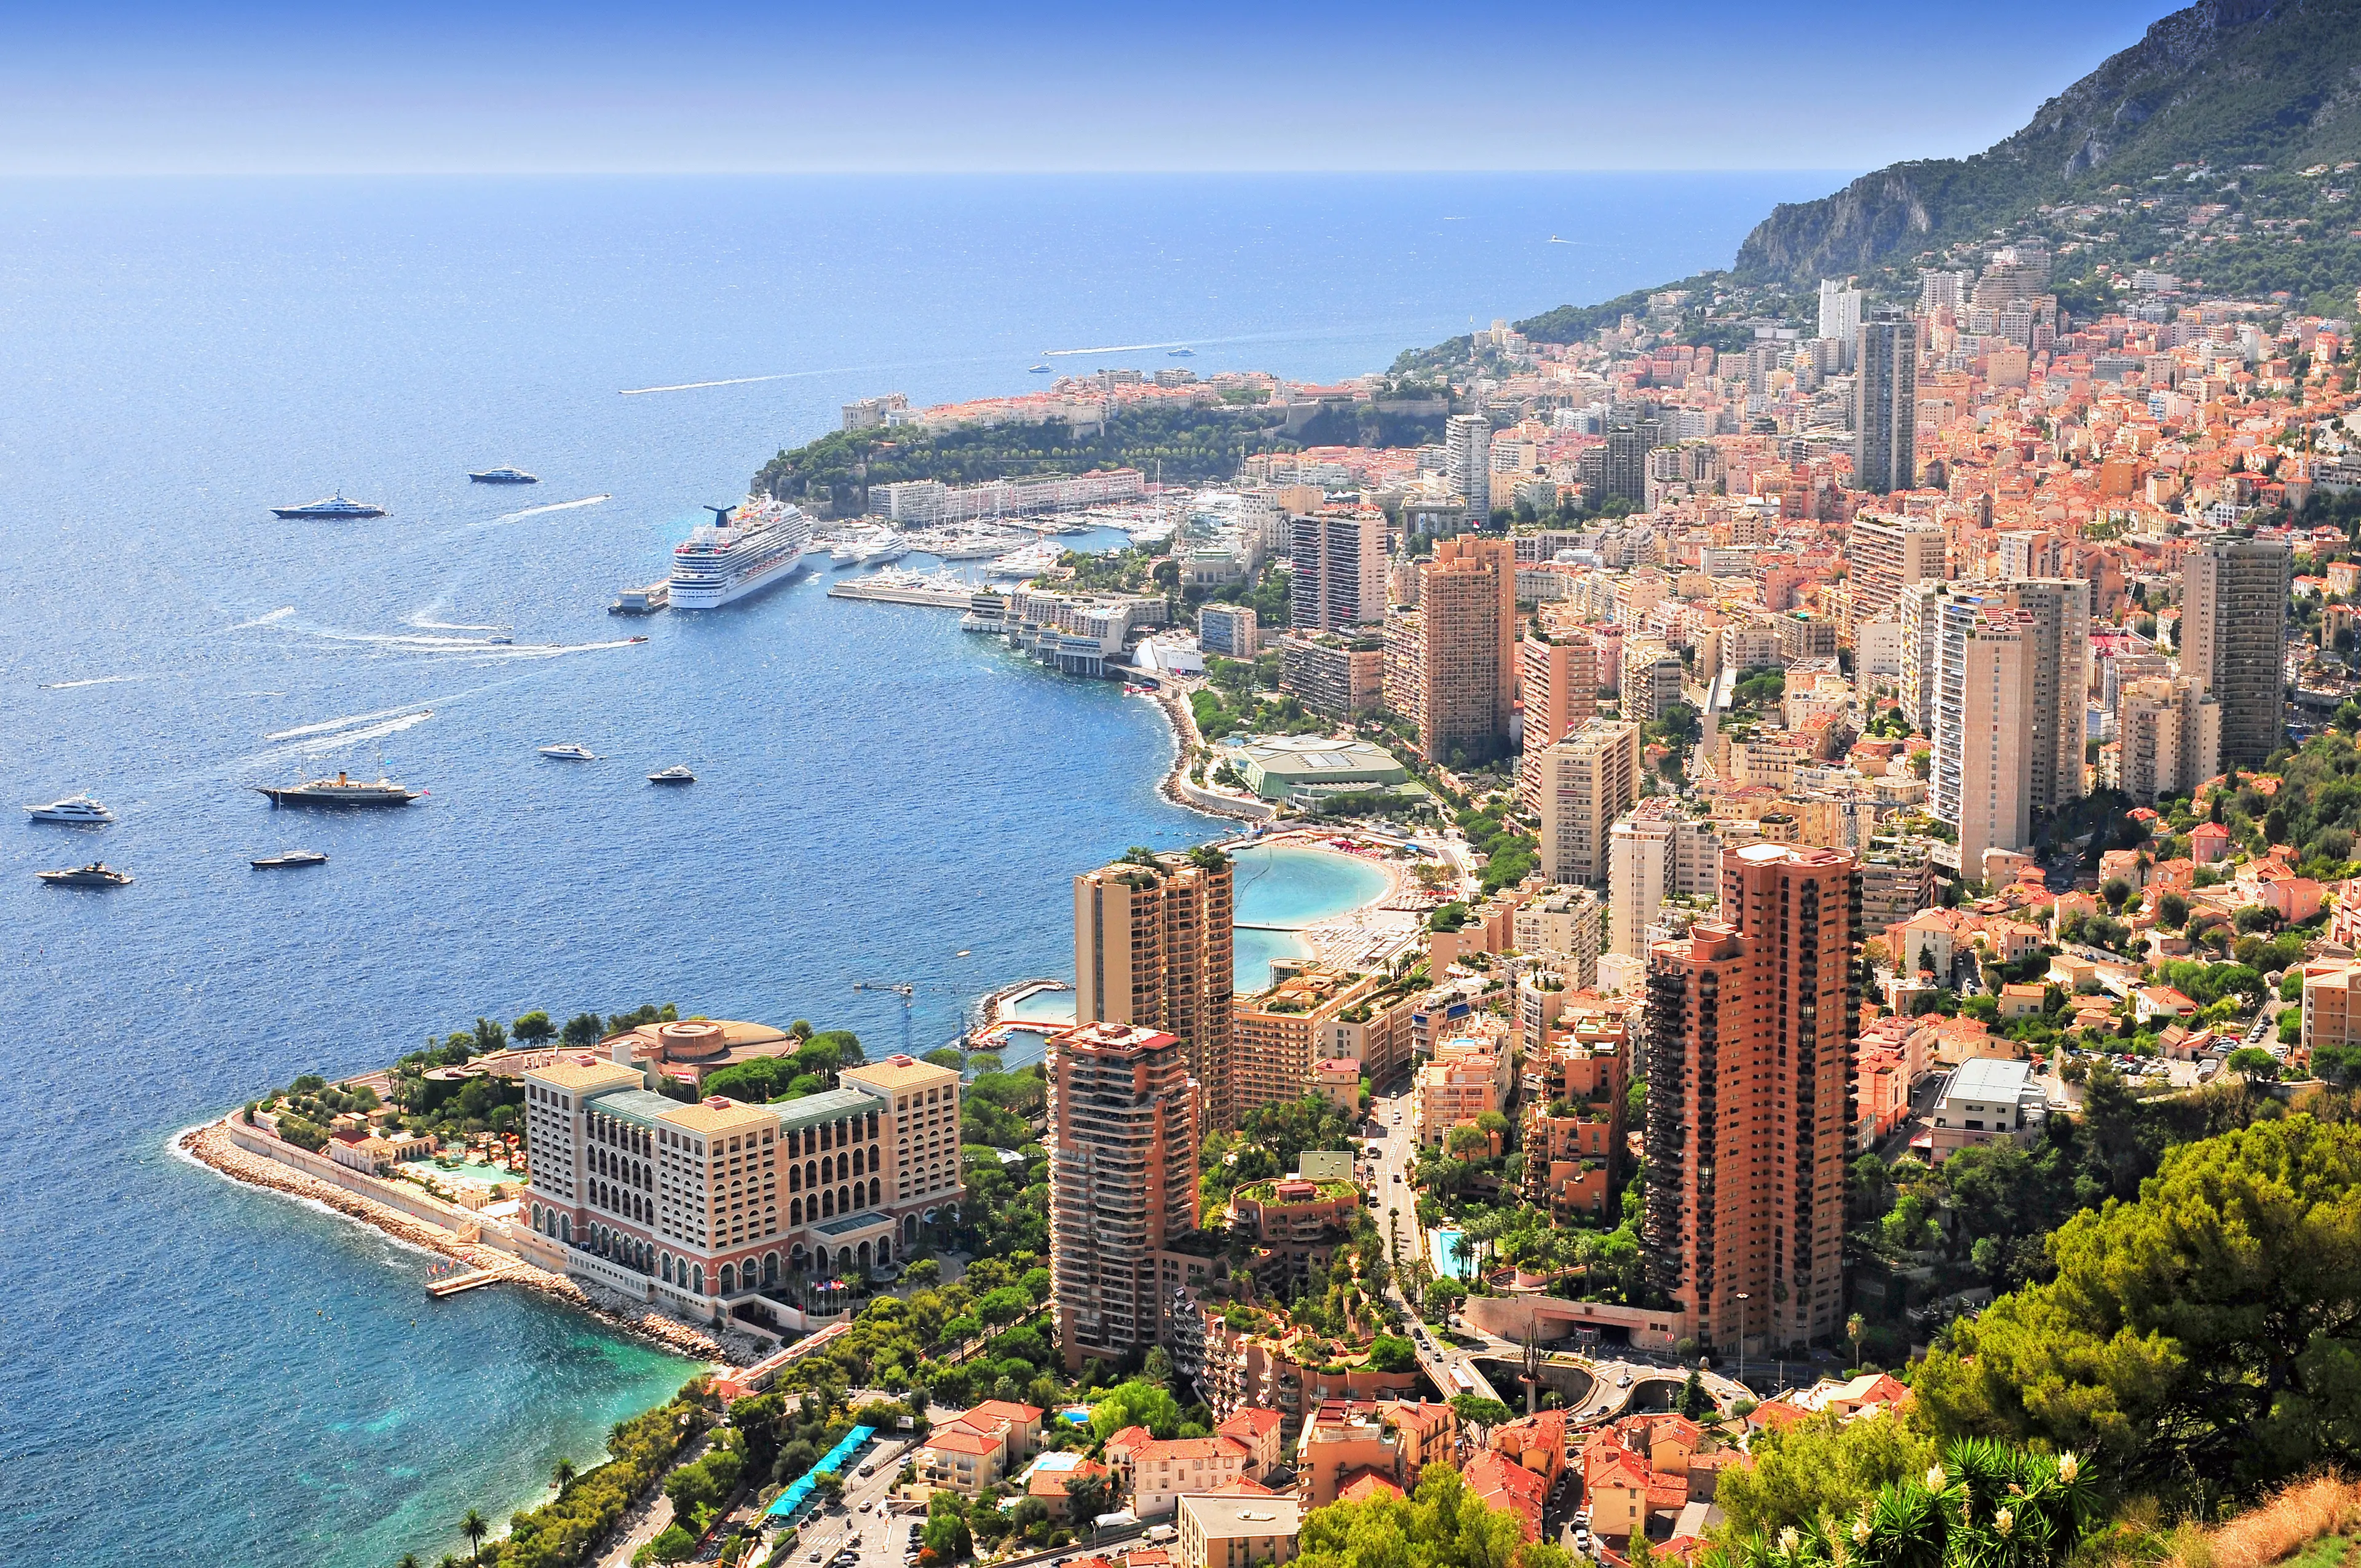 1-Day Family Sightseeing and Relaxation Tour in Monaco for Locals